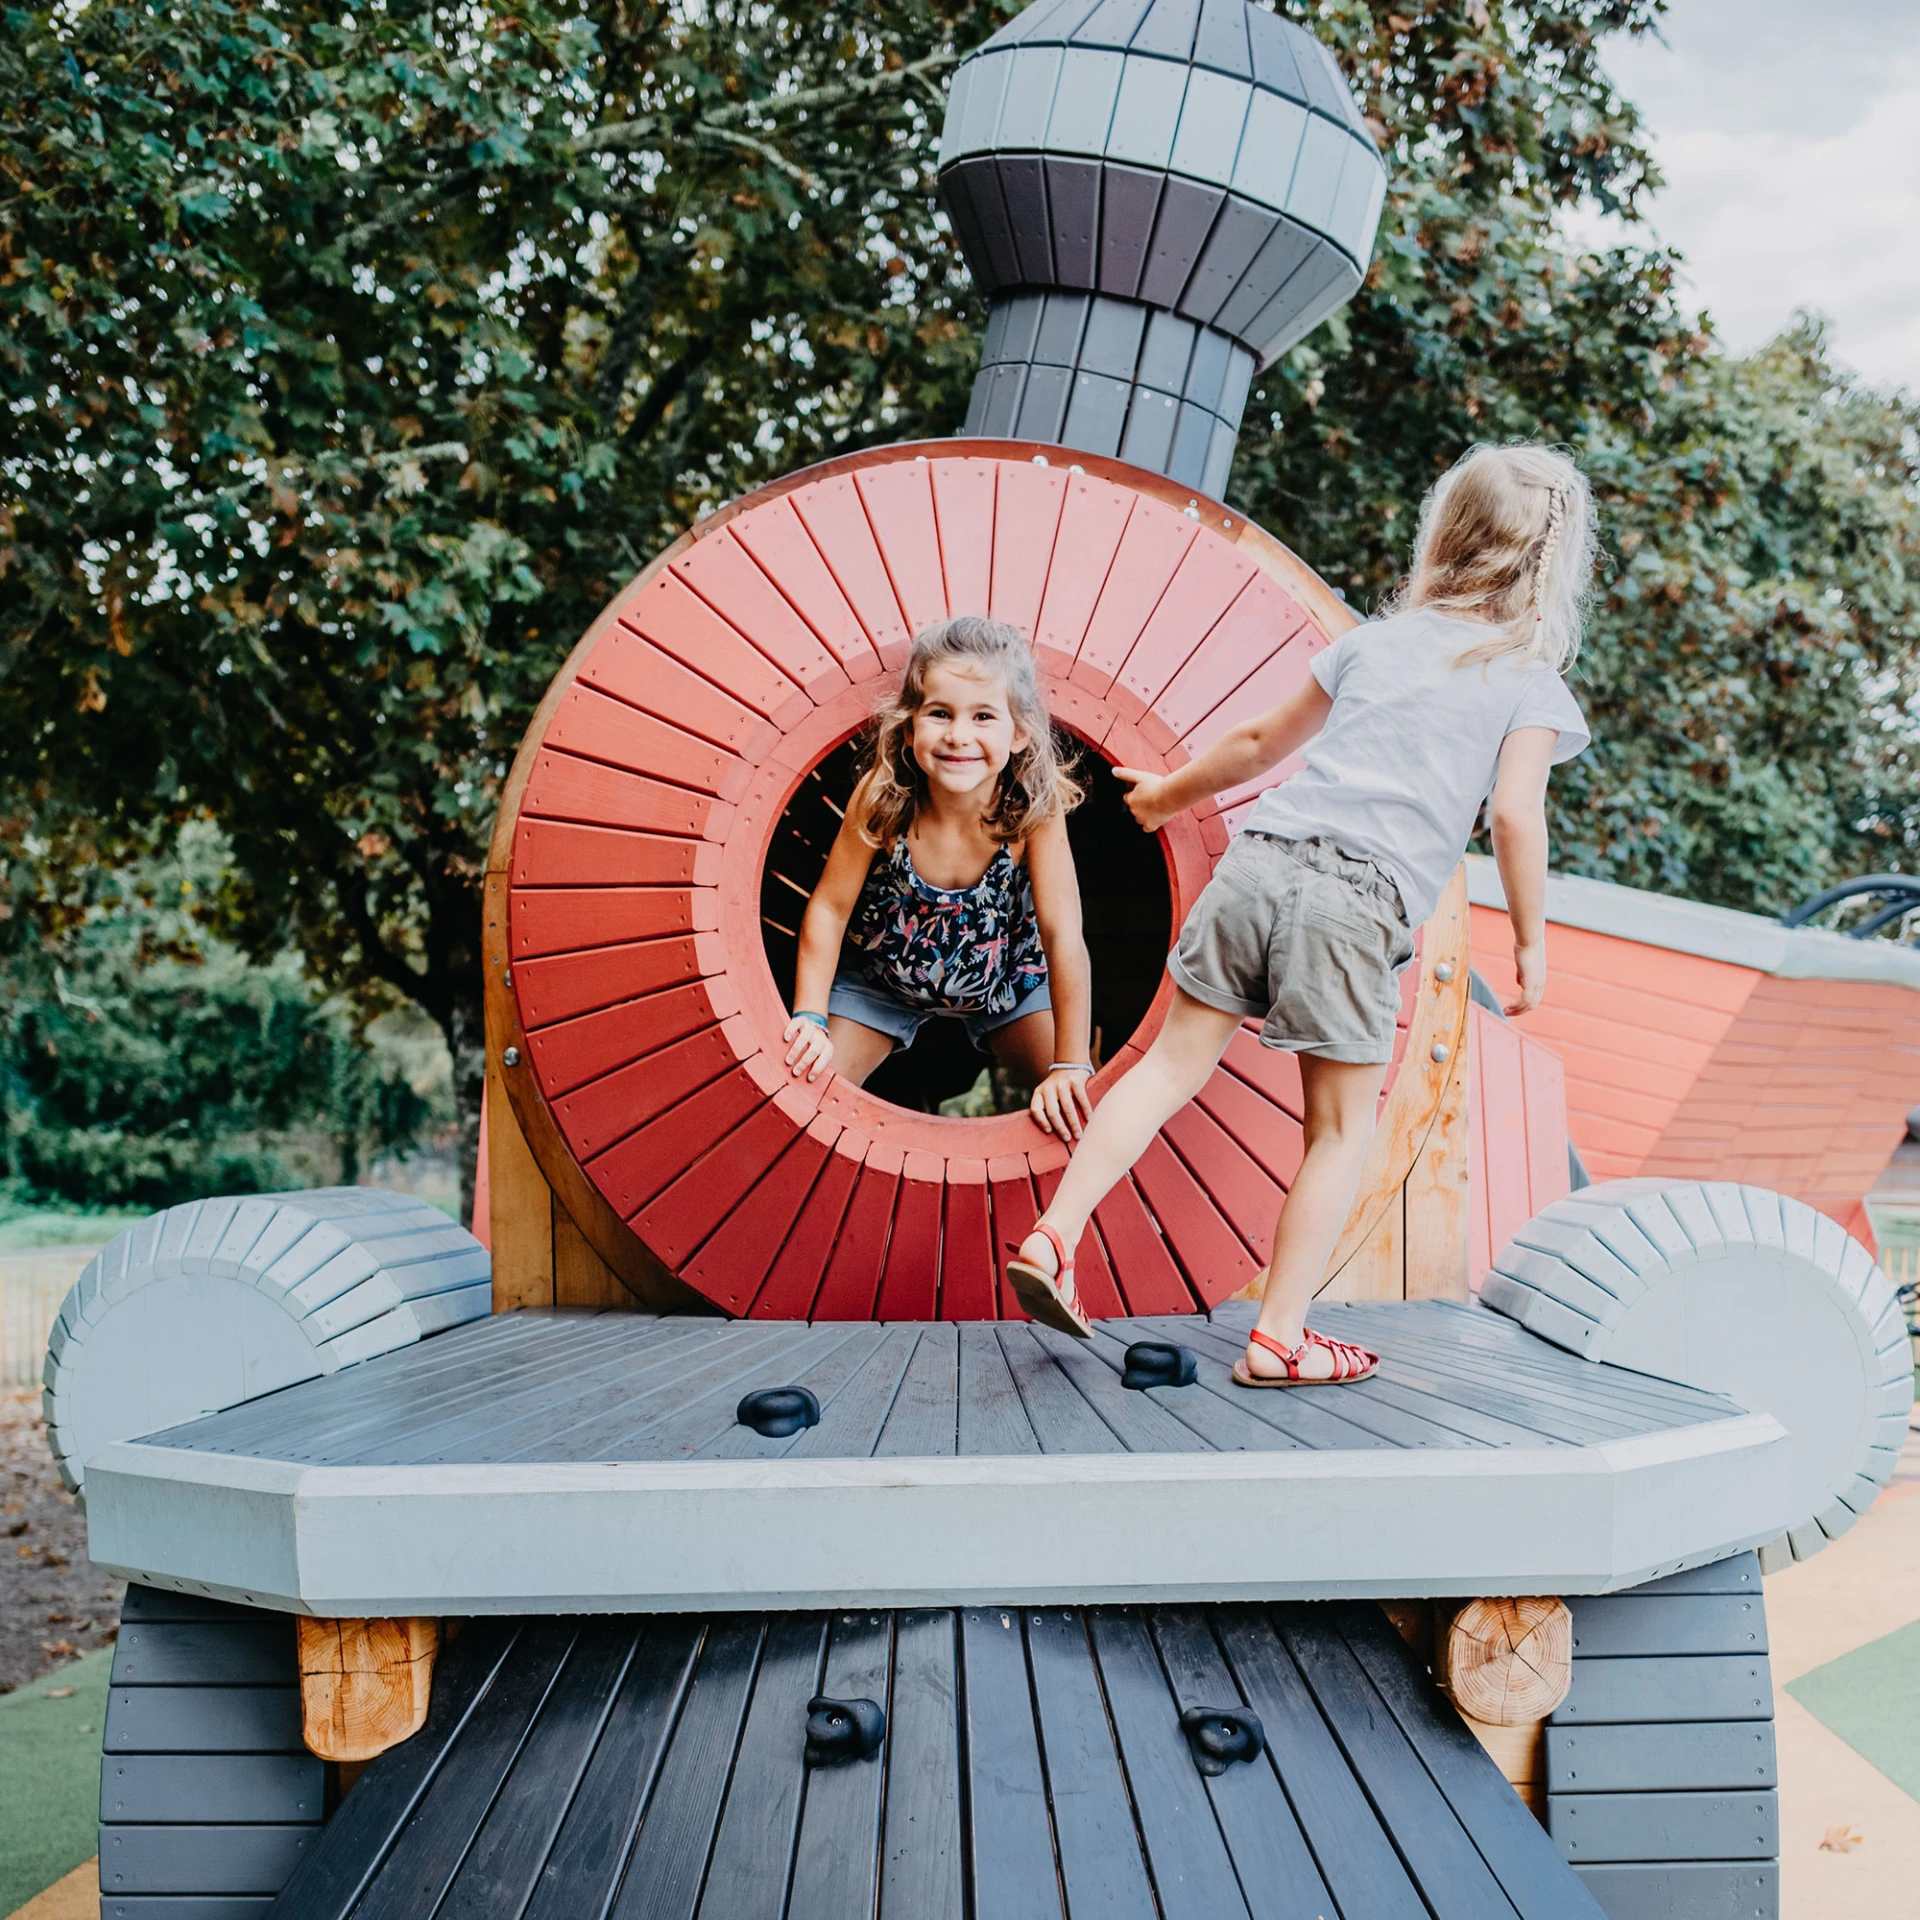 Children playing on a natural wood train play structure